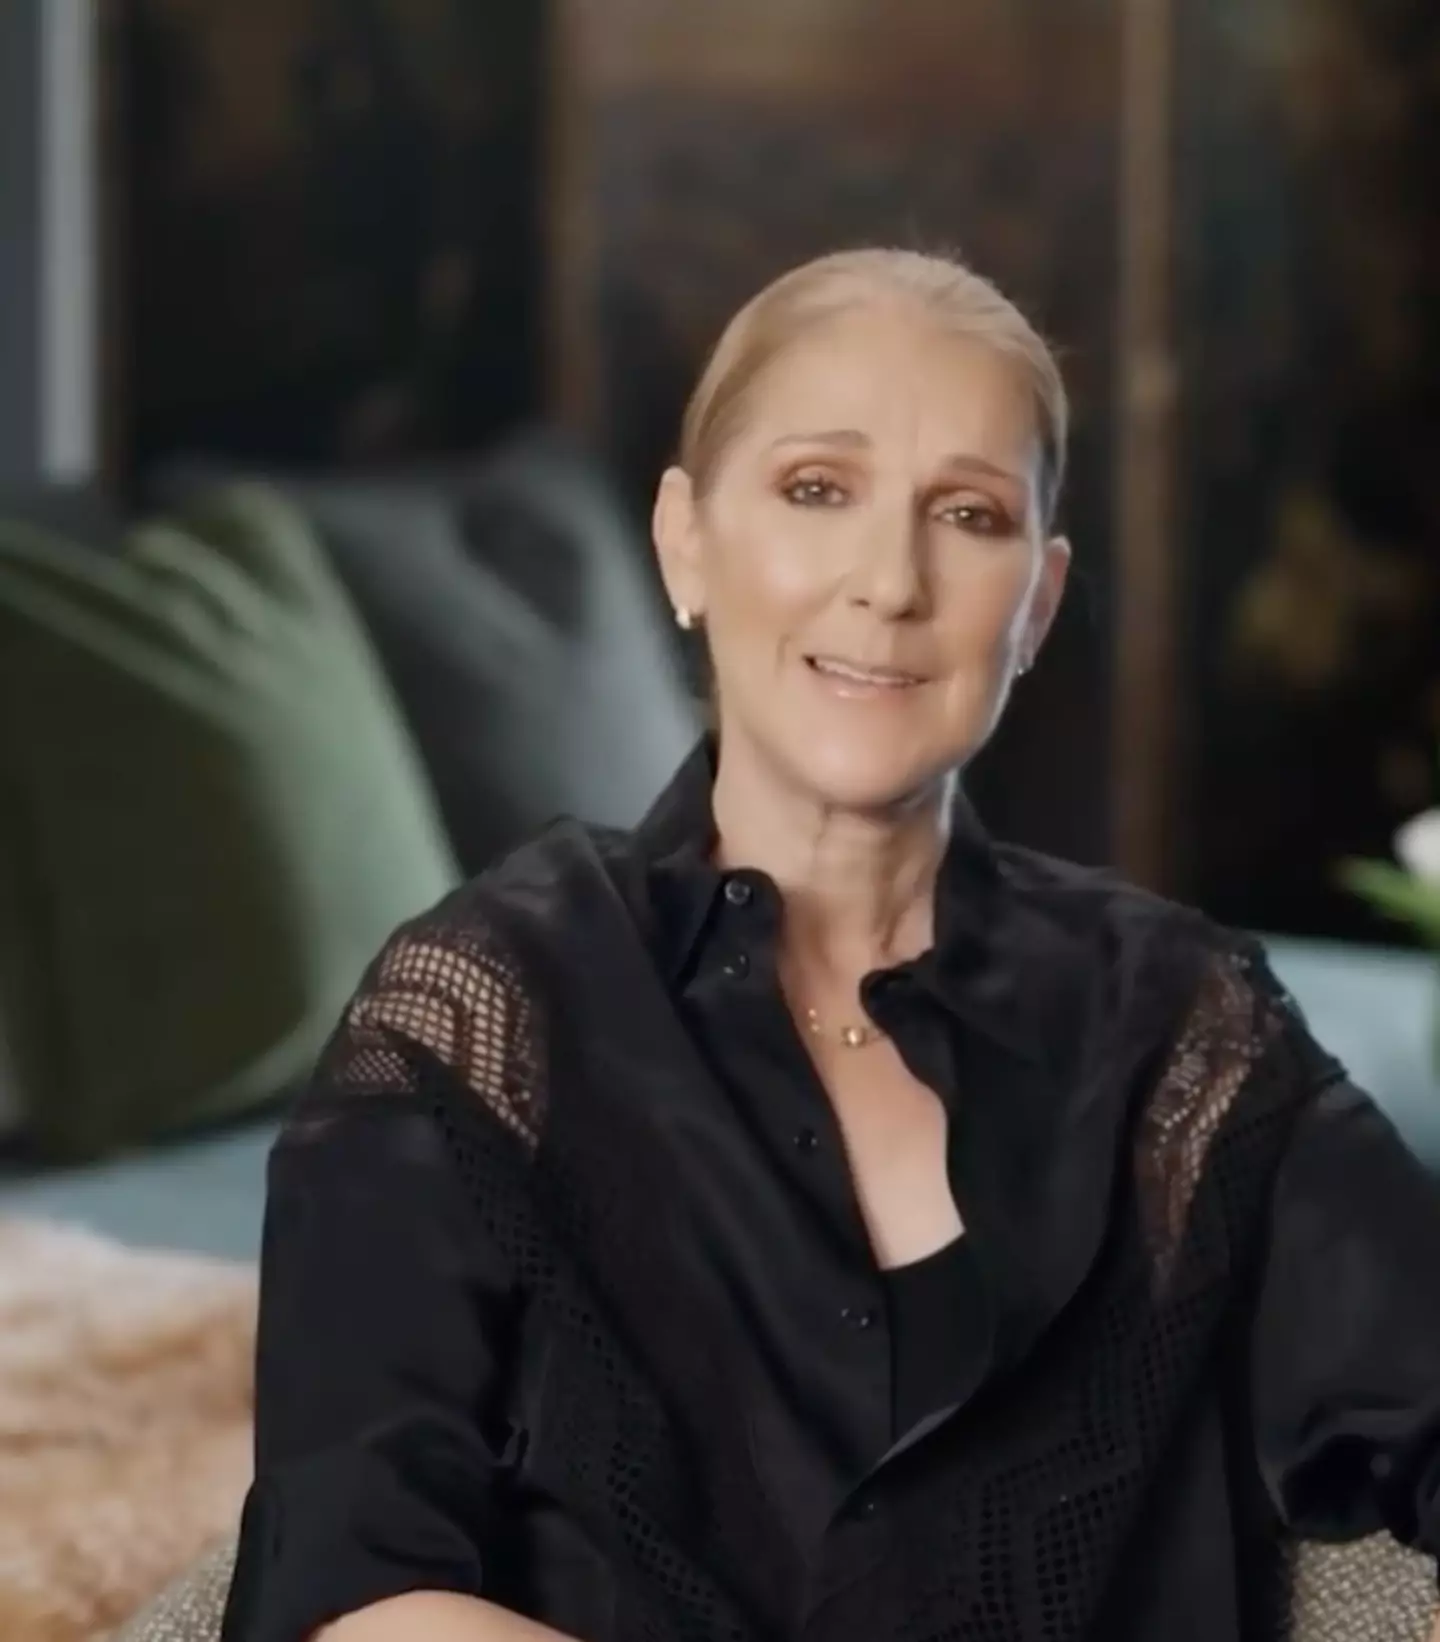 Celine Dion disclosed she had been diagnosed with 'Stiff Person Syndrome' last year.